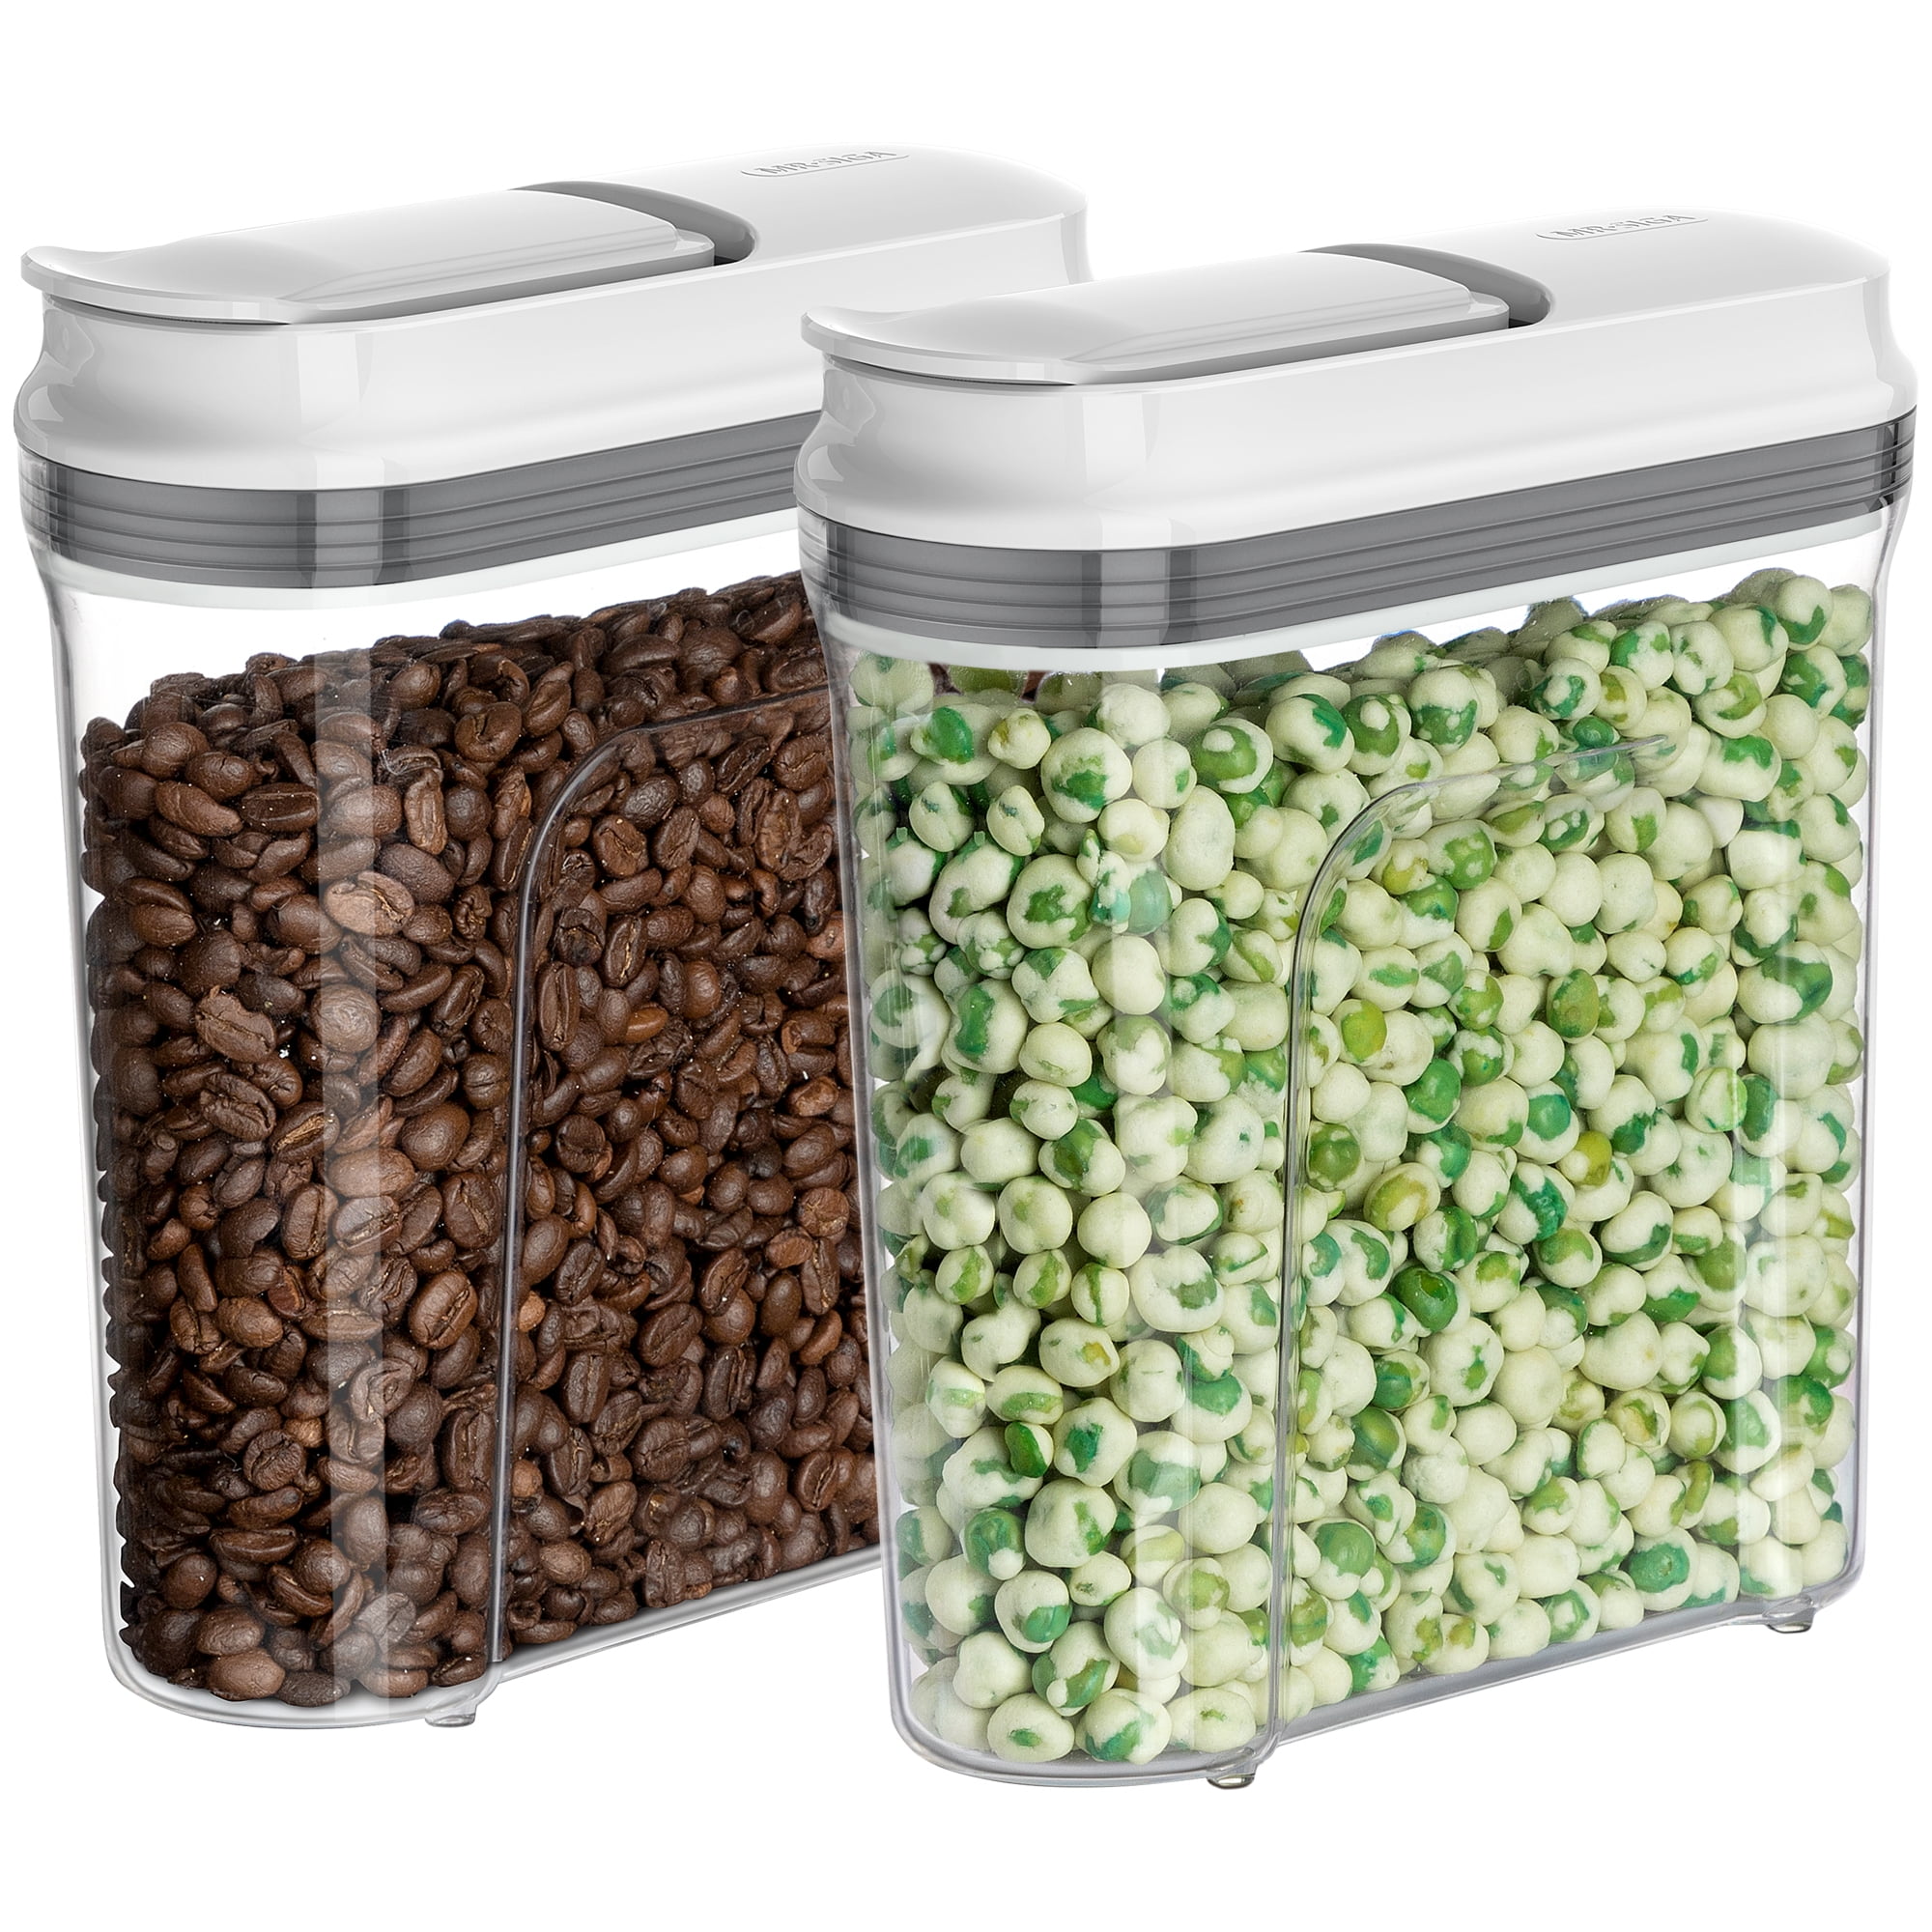 Deluxe Cereal Kit  Food, Cereal containers, Frozen kitchen